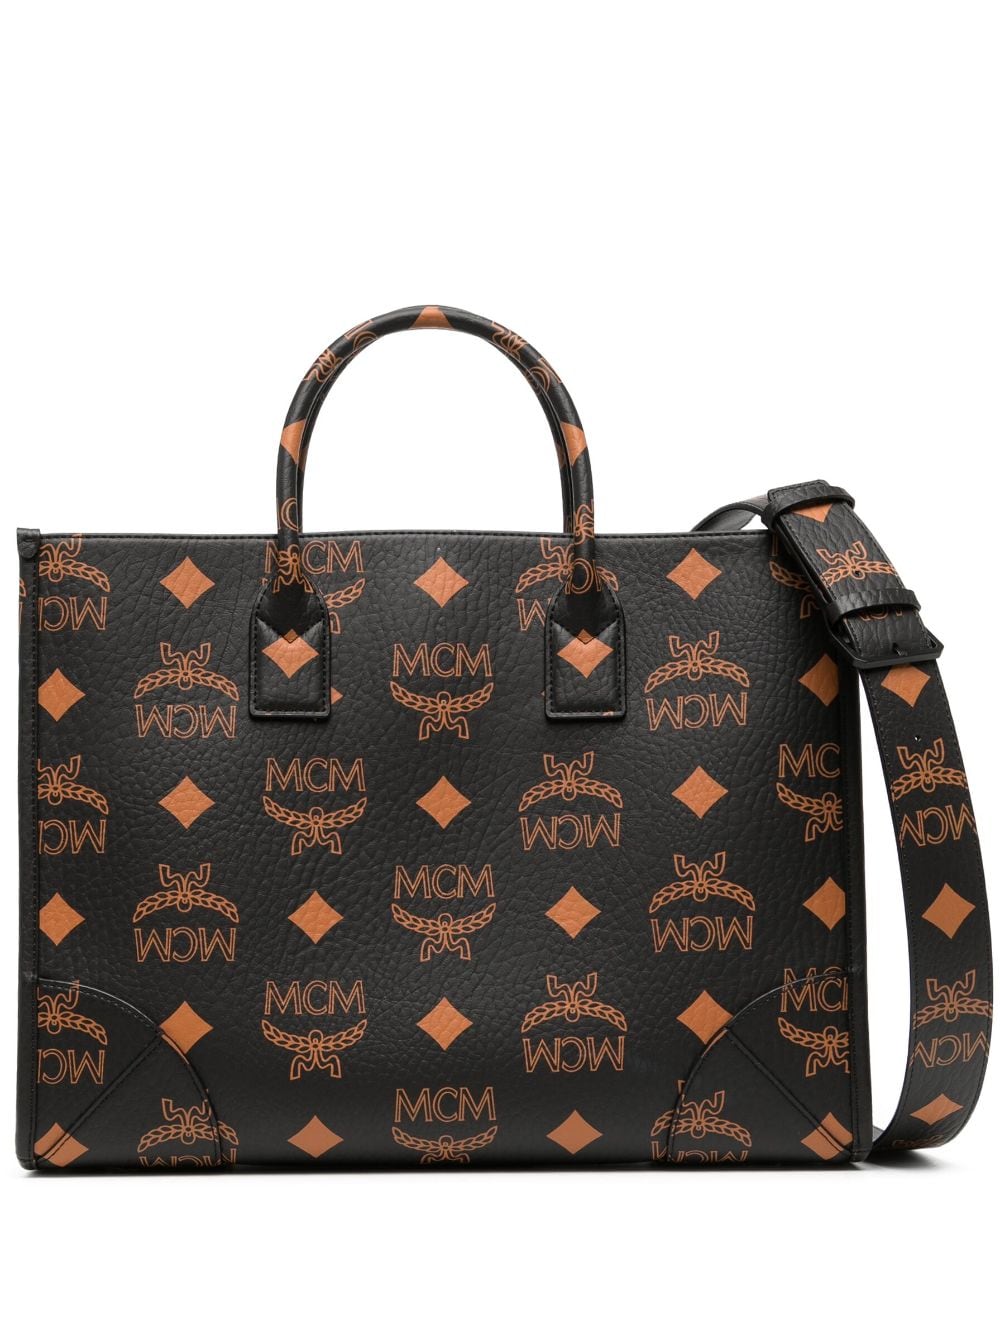 MCM Large Munchen Leather Tote Bag - Farfetch